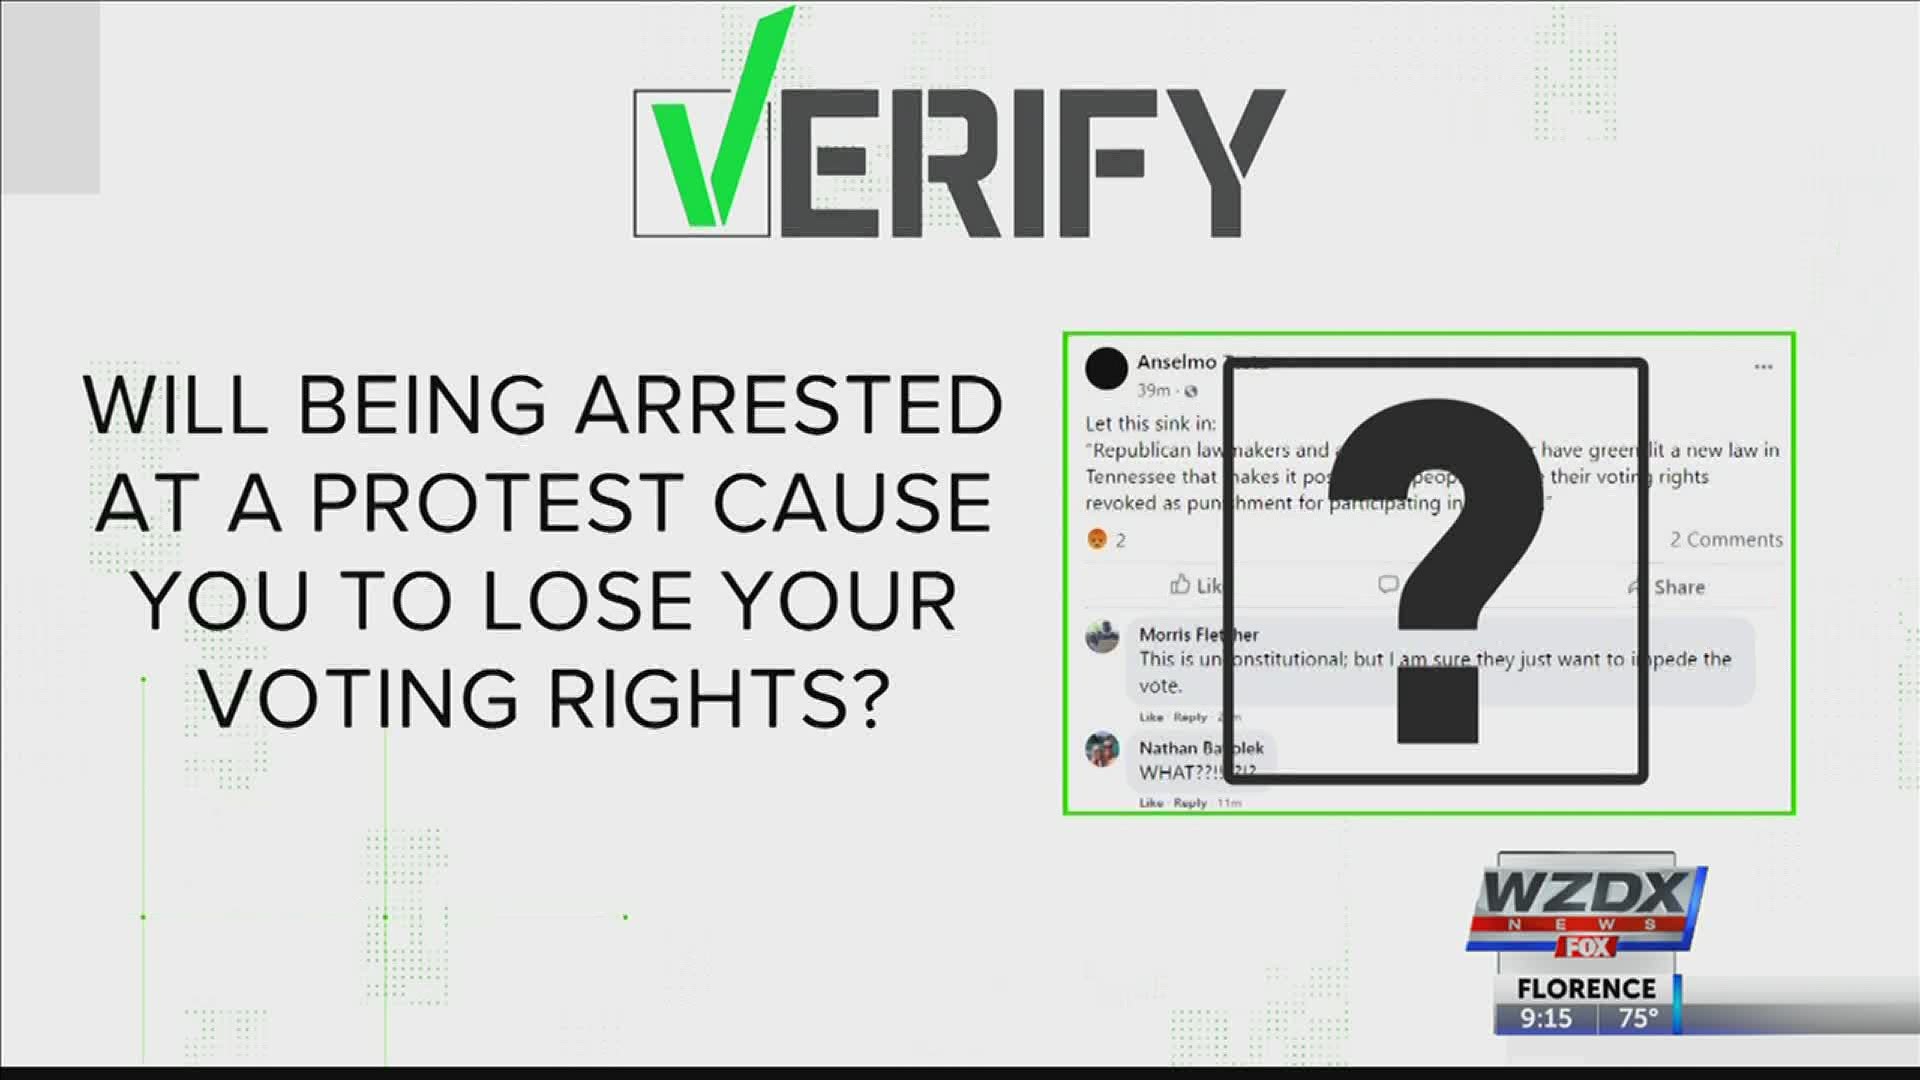 Will you lose your voting rights if you get arrested for protesting? We VERIFY.